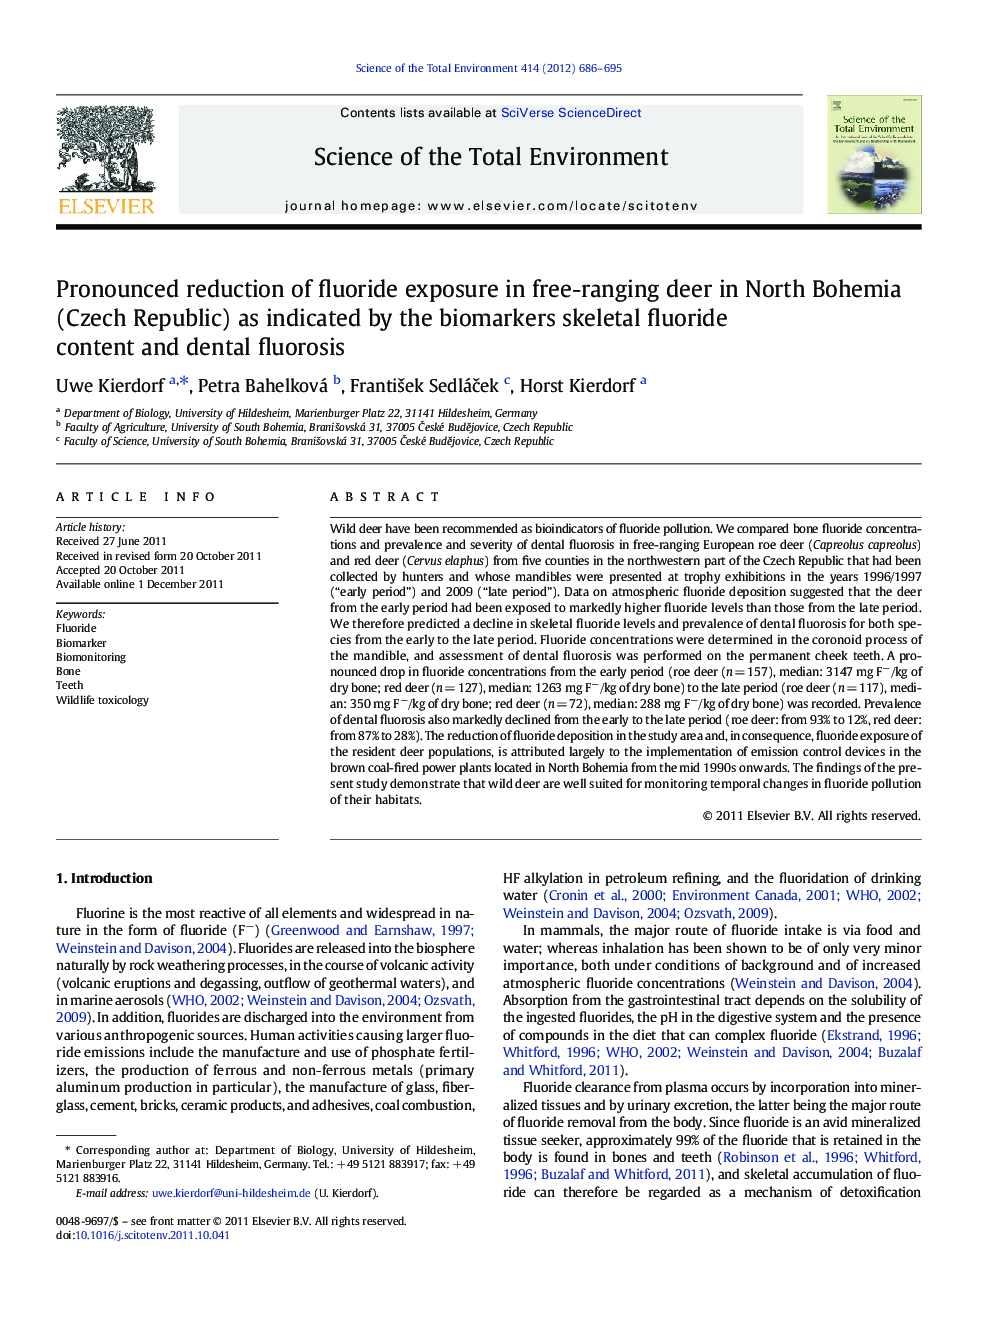 Pronounced reduction of fluoride exposure in free-ranging deer in North Bohemia (Czech Republic) as indicated by the biomarkers skeletal fluoride content and dental fluorosis